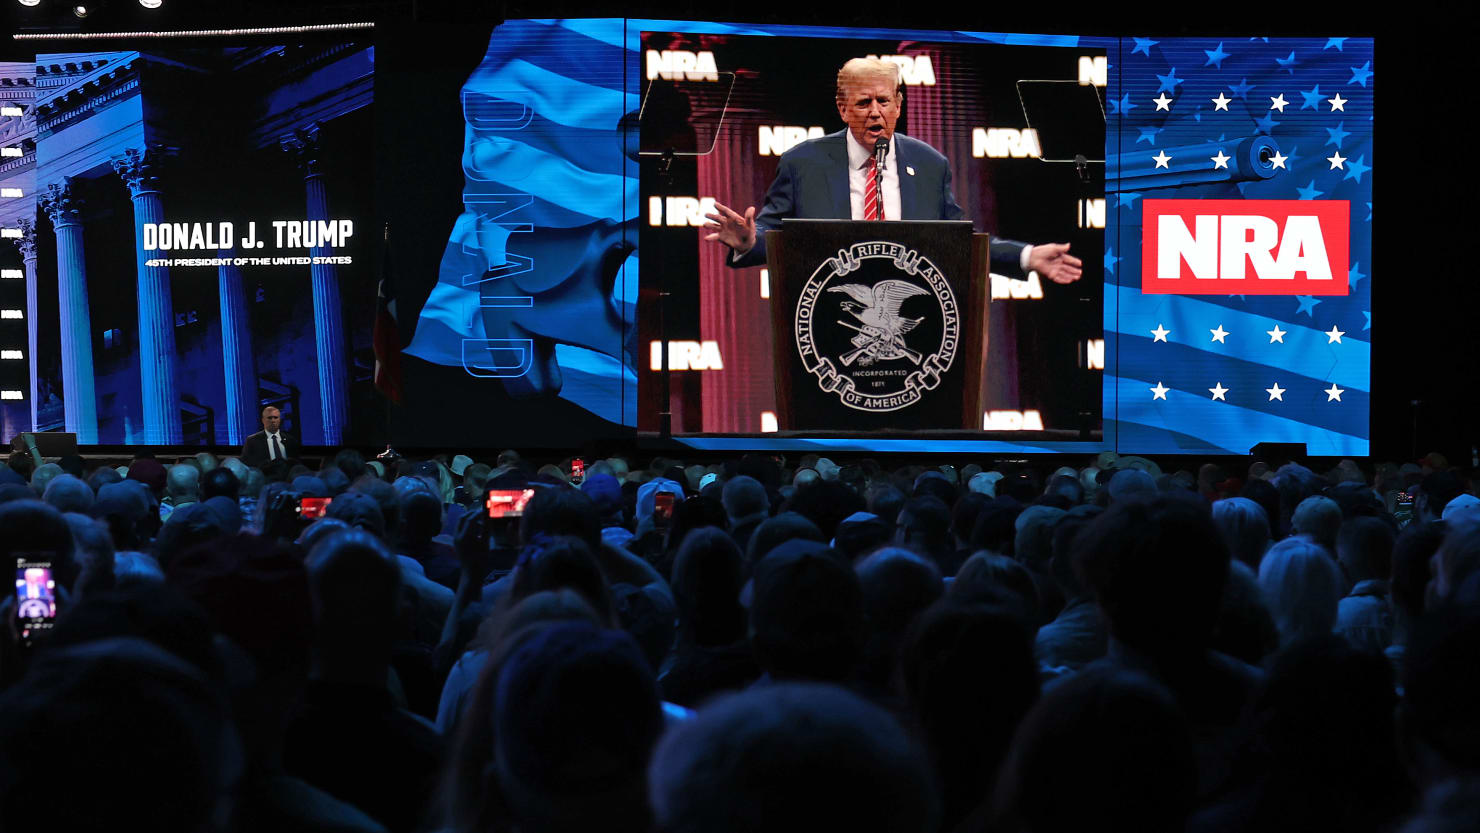 Current Status: Trump Ends NRA Speech With ‘Horror’ Warning Set to Dramatic QAnon Music